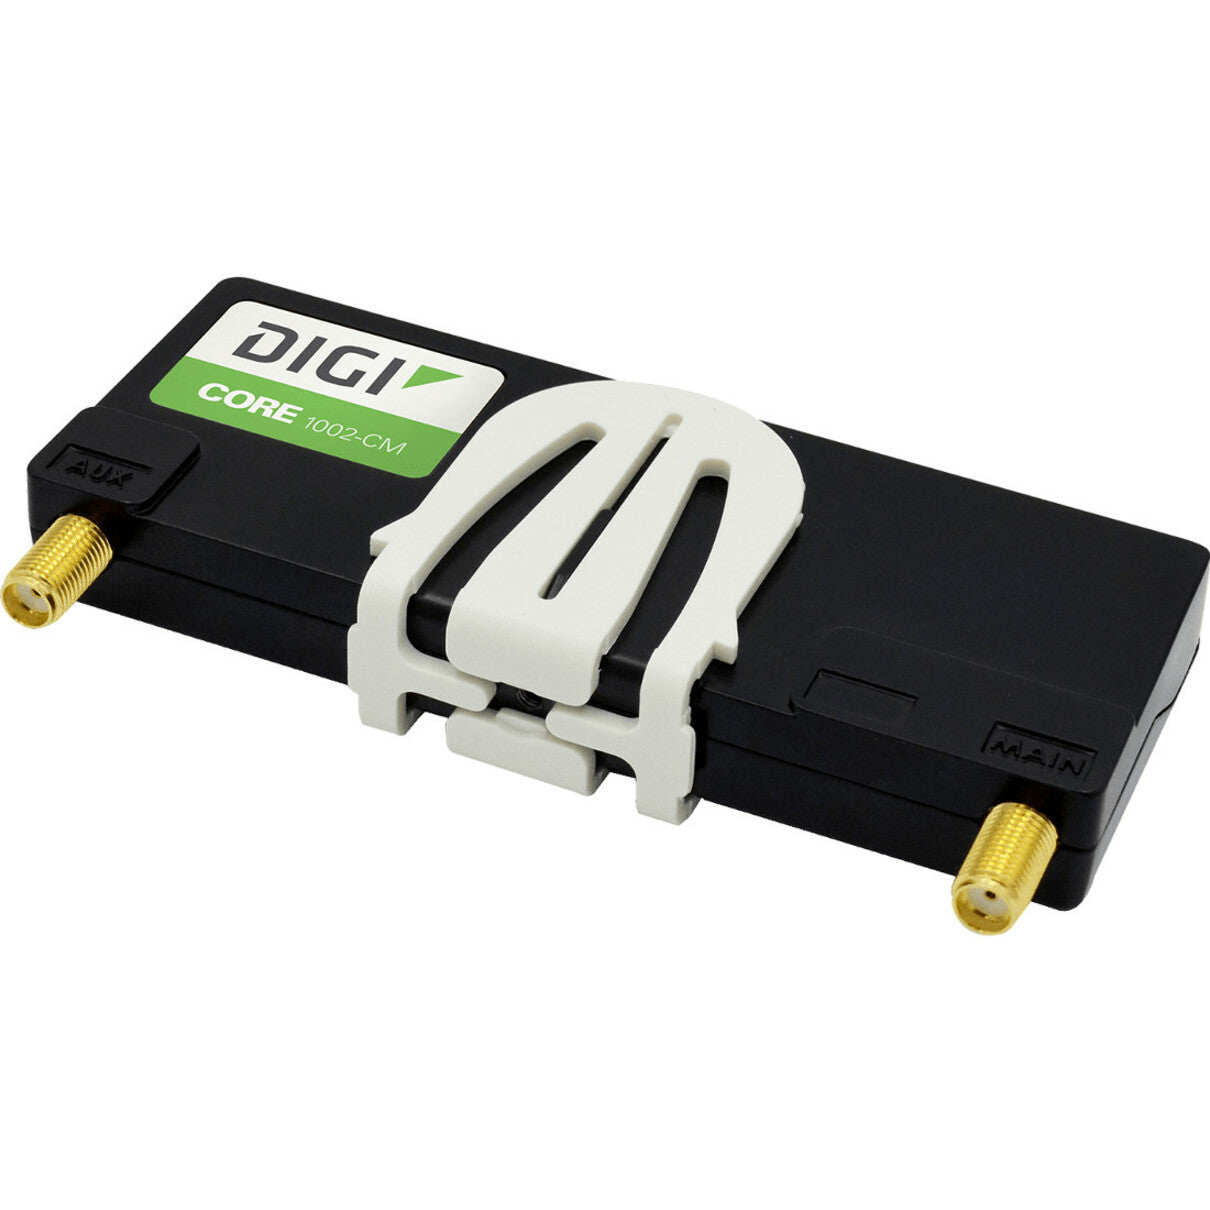 Accelerated ASB-1002-CM06-GLB LTE Plug-In Modem, High-Speed Internet Connectivity for Your Devices